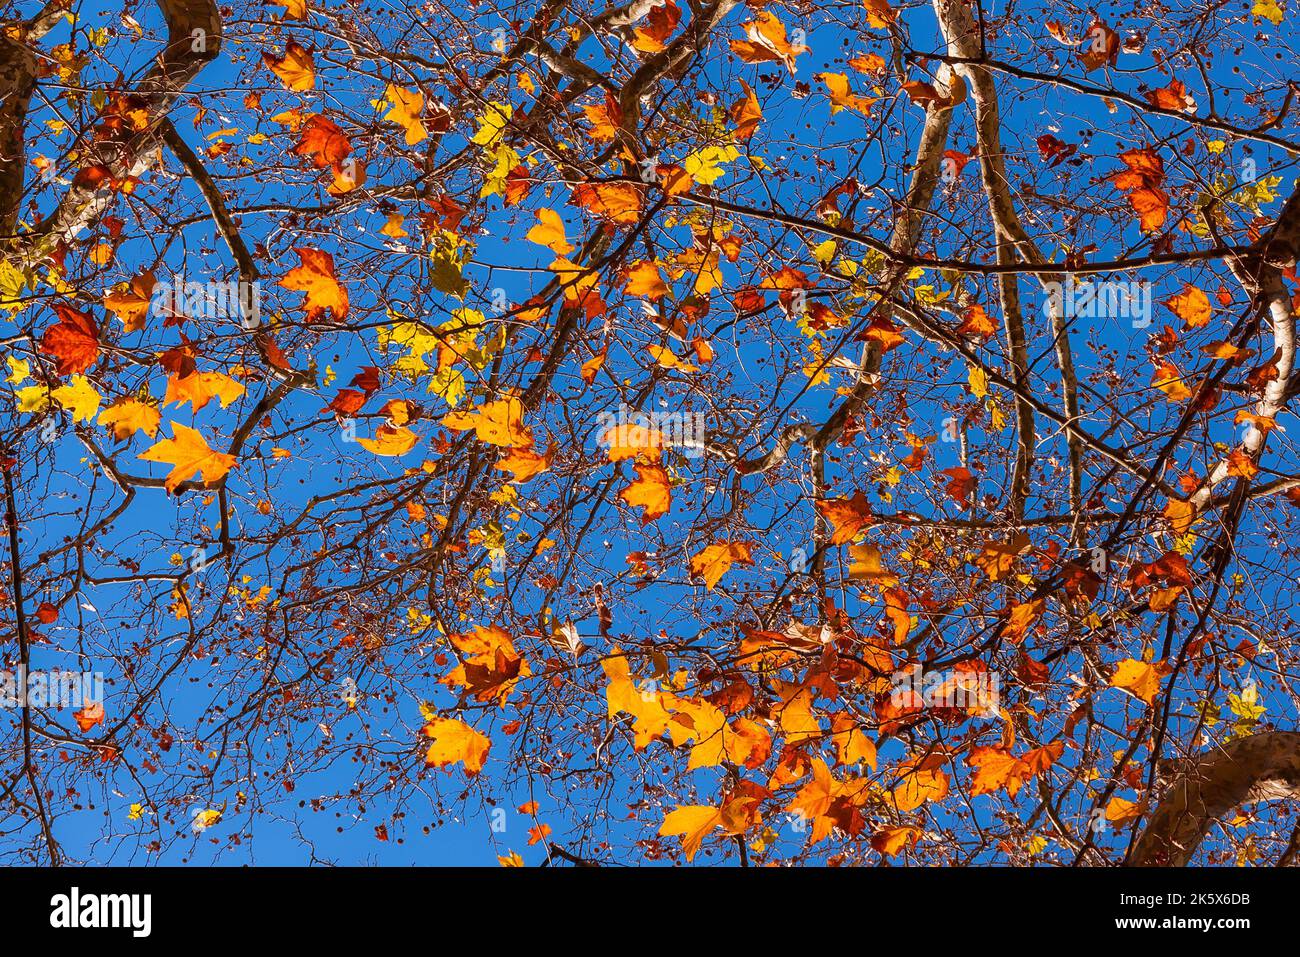 Autumnal and foliage background. Backlit sycamore brown, orange, yellow and red leaves with blue sky Stock Photo